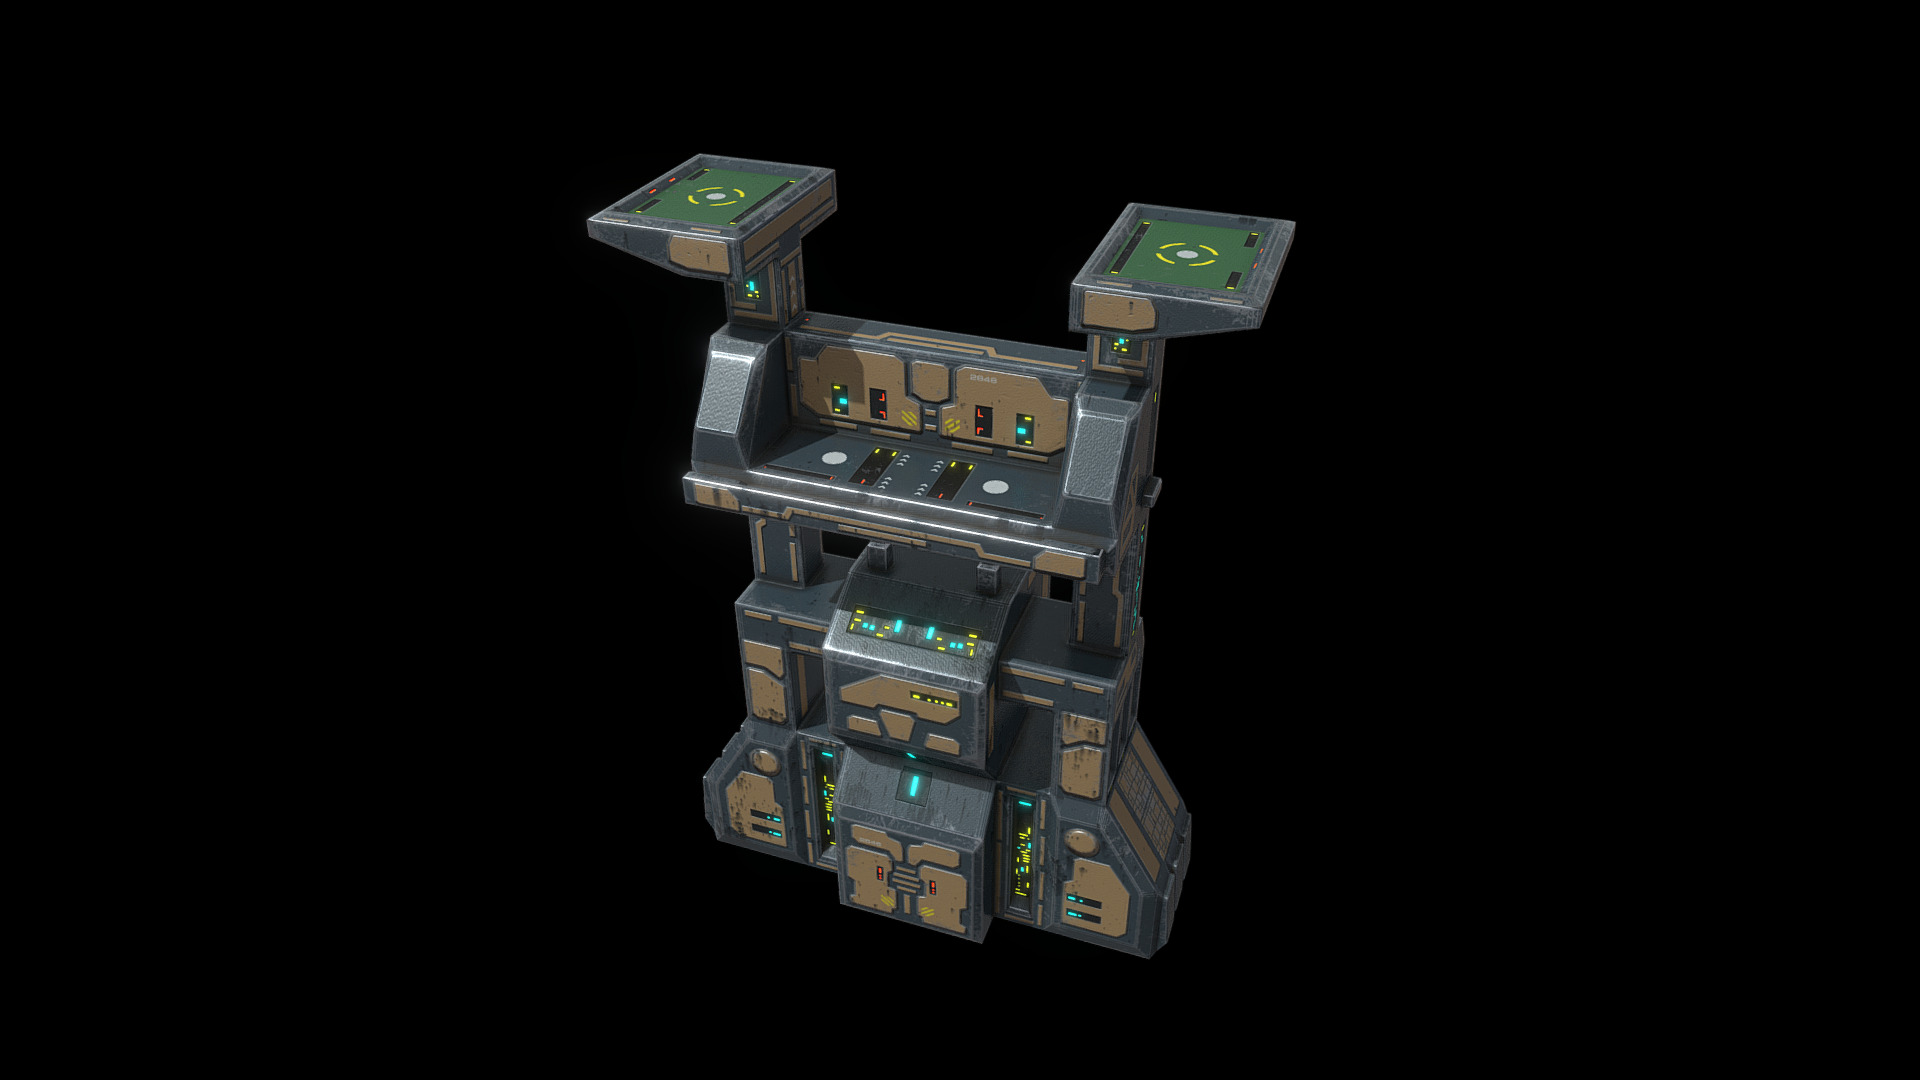 3D model Low poly sci fi dock building - This is a 3D model of the Low poly sci fi dock building. The 3D model is about a computer chip with a black background.